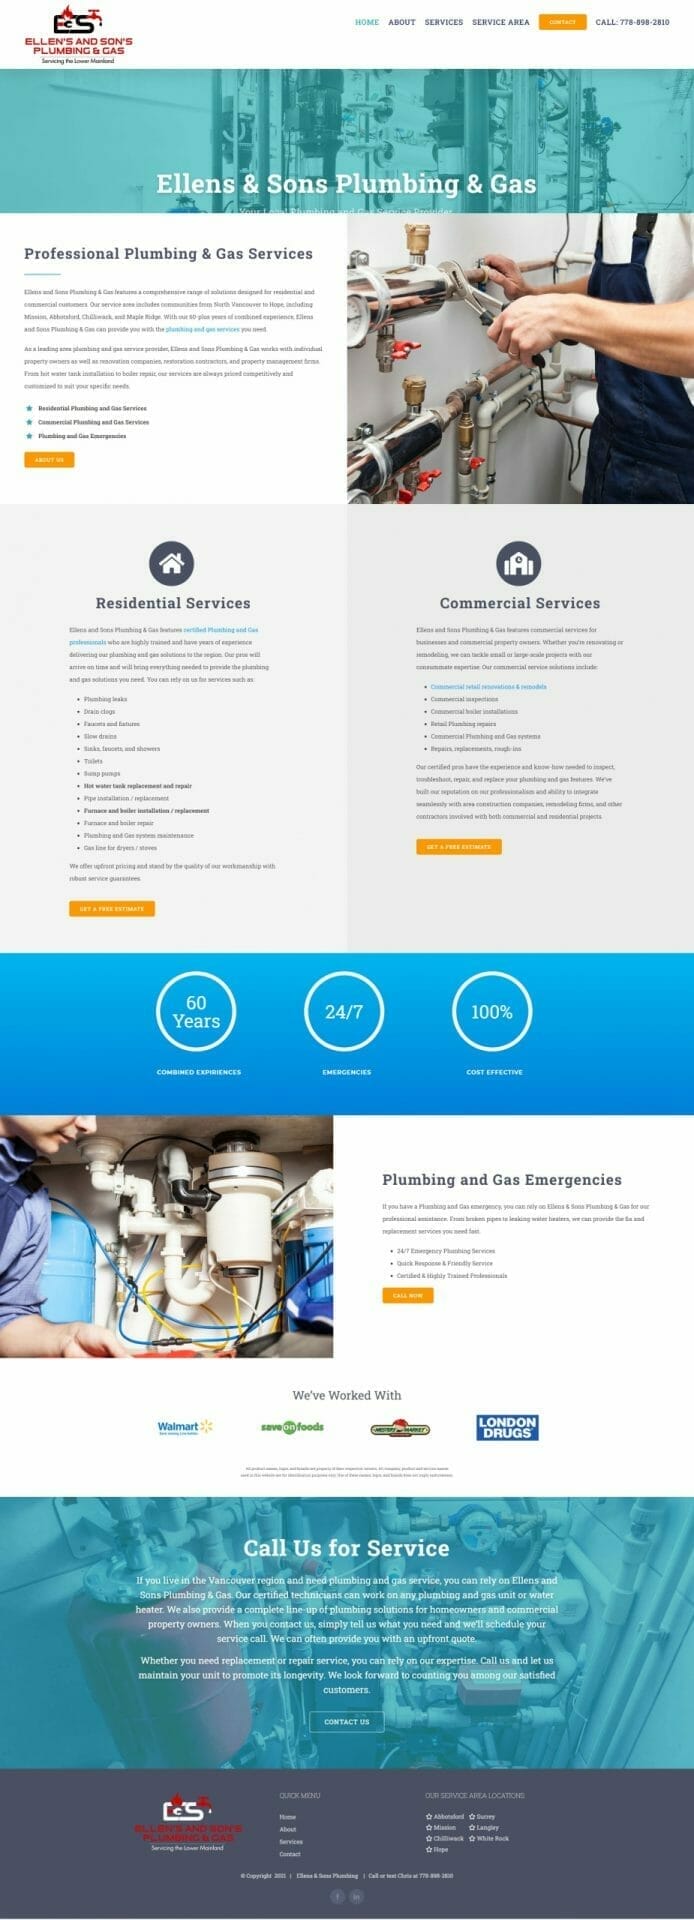 Home page layout for Ellens Sons Plumbing and Gas